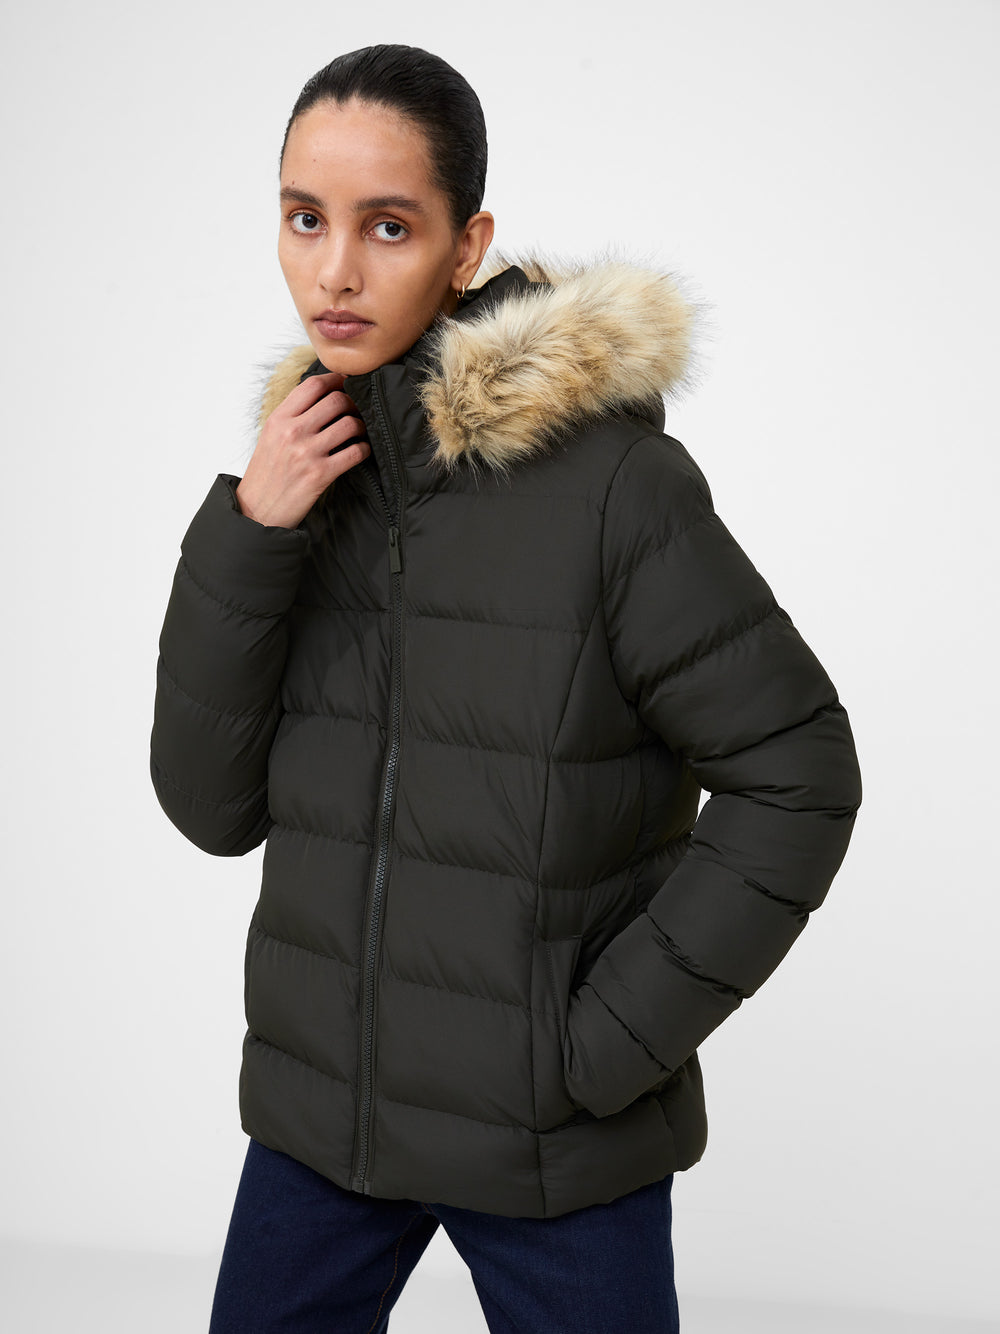 Mock-Neck Faux-Leather Puffer Jacket for Women